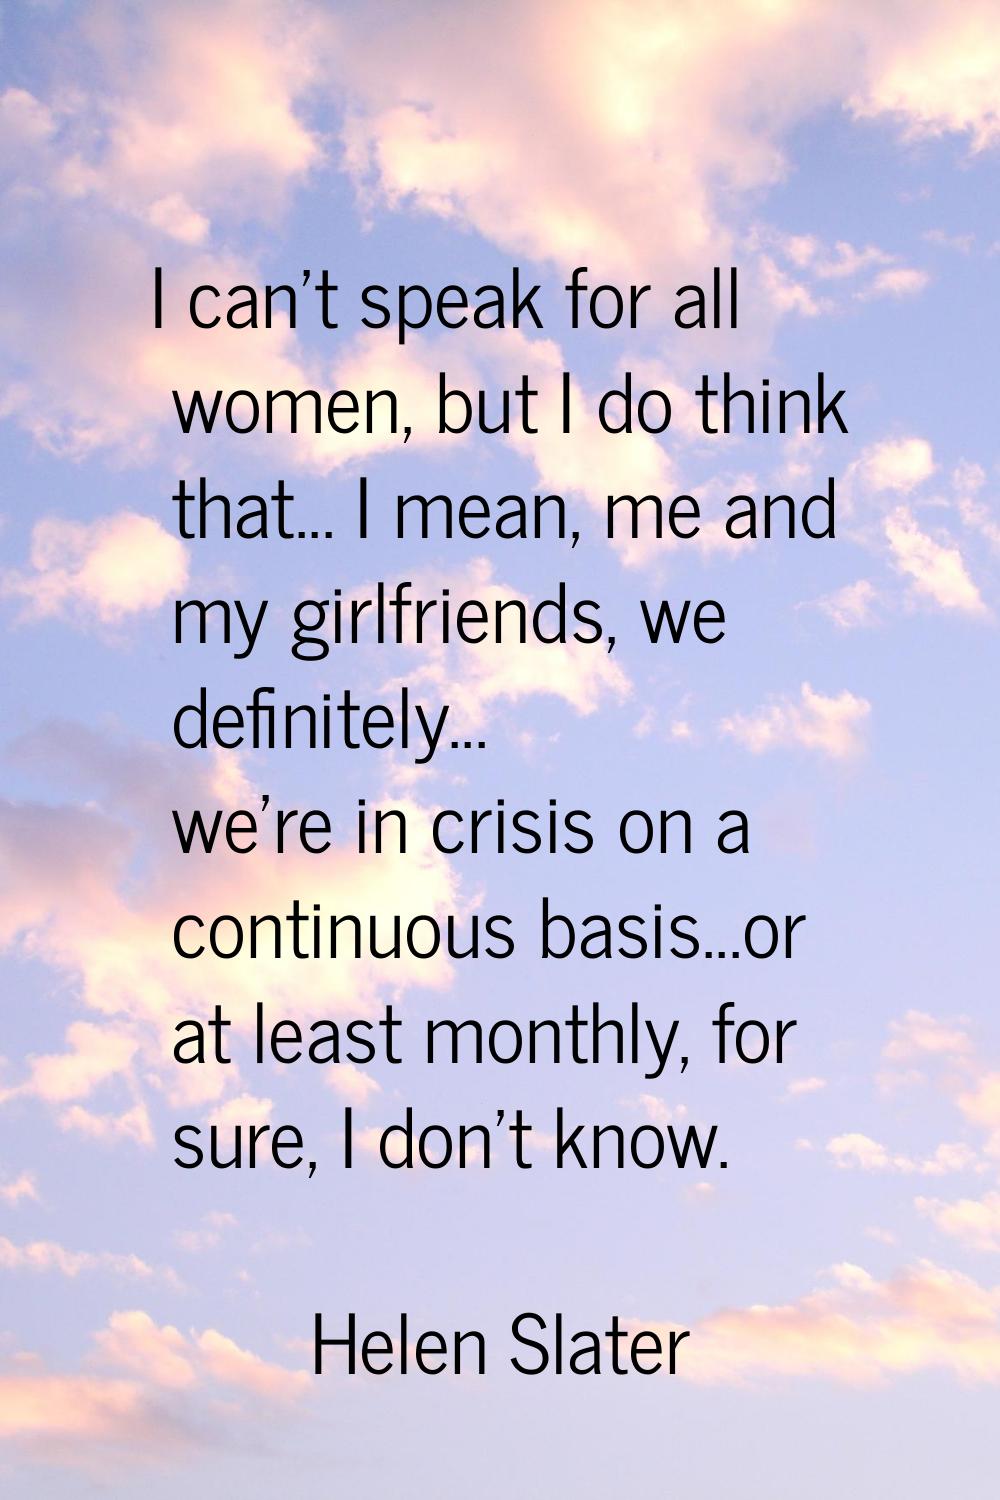 I can't speak for all women, but I do think that... I mean, me and my girlfriends, we definitely...